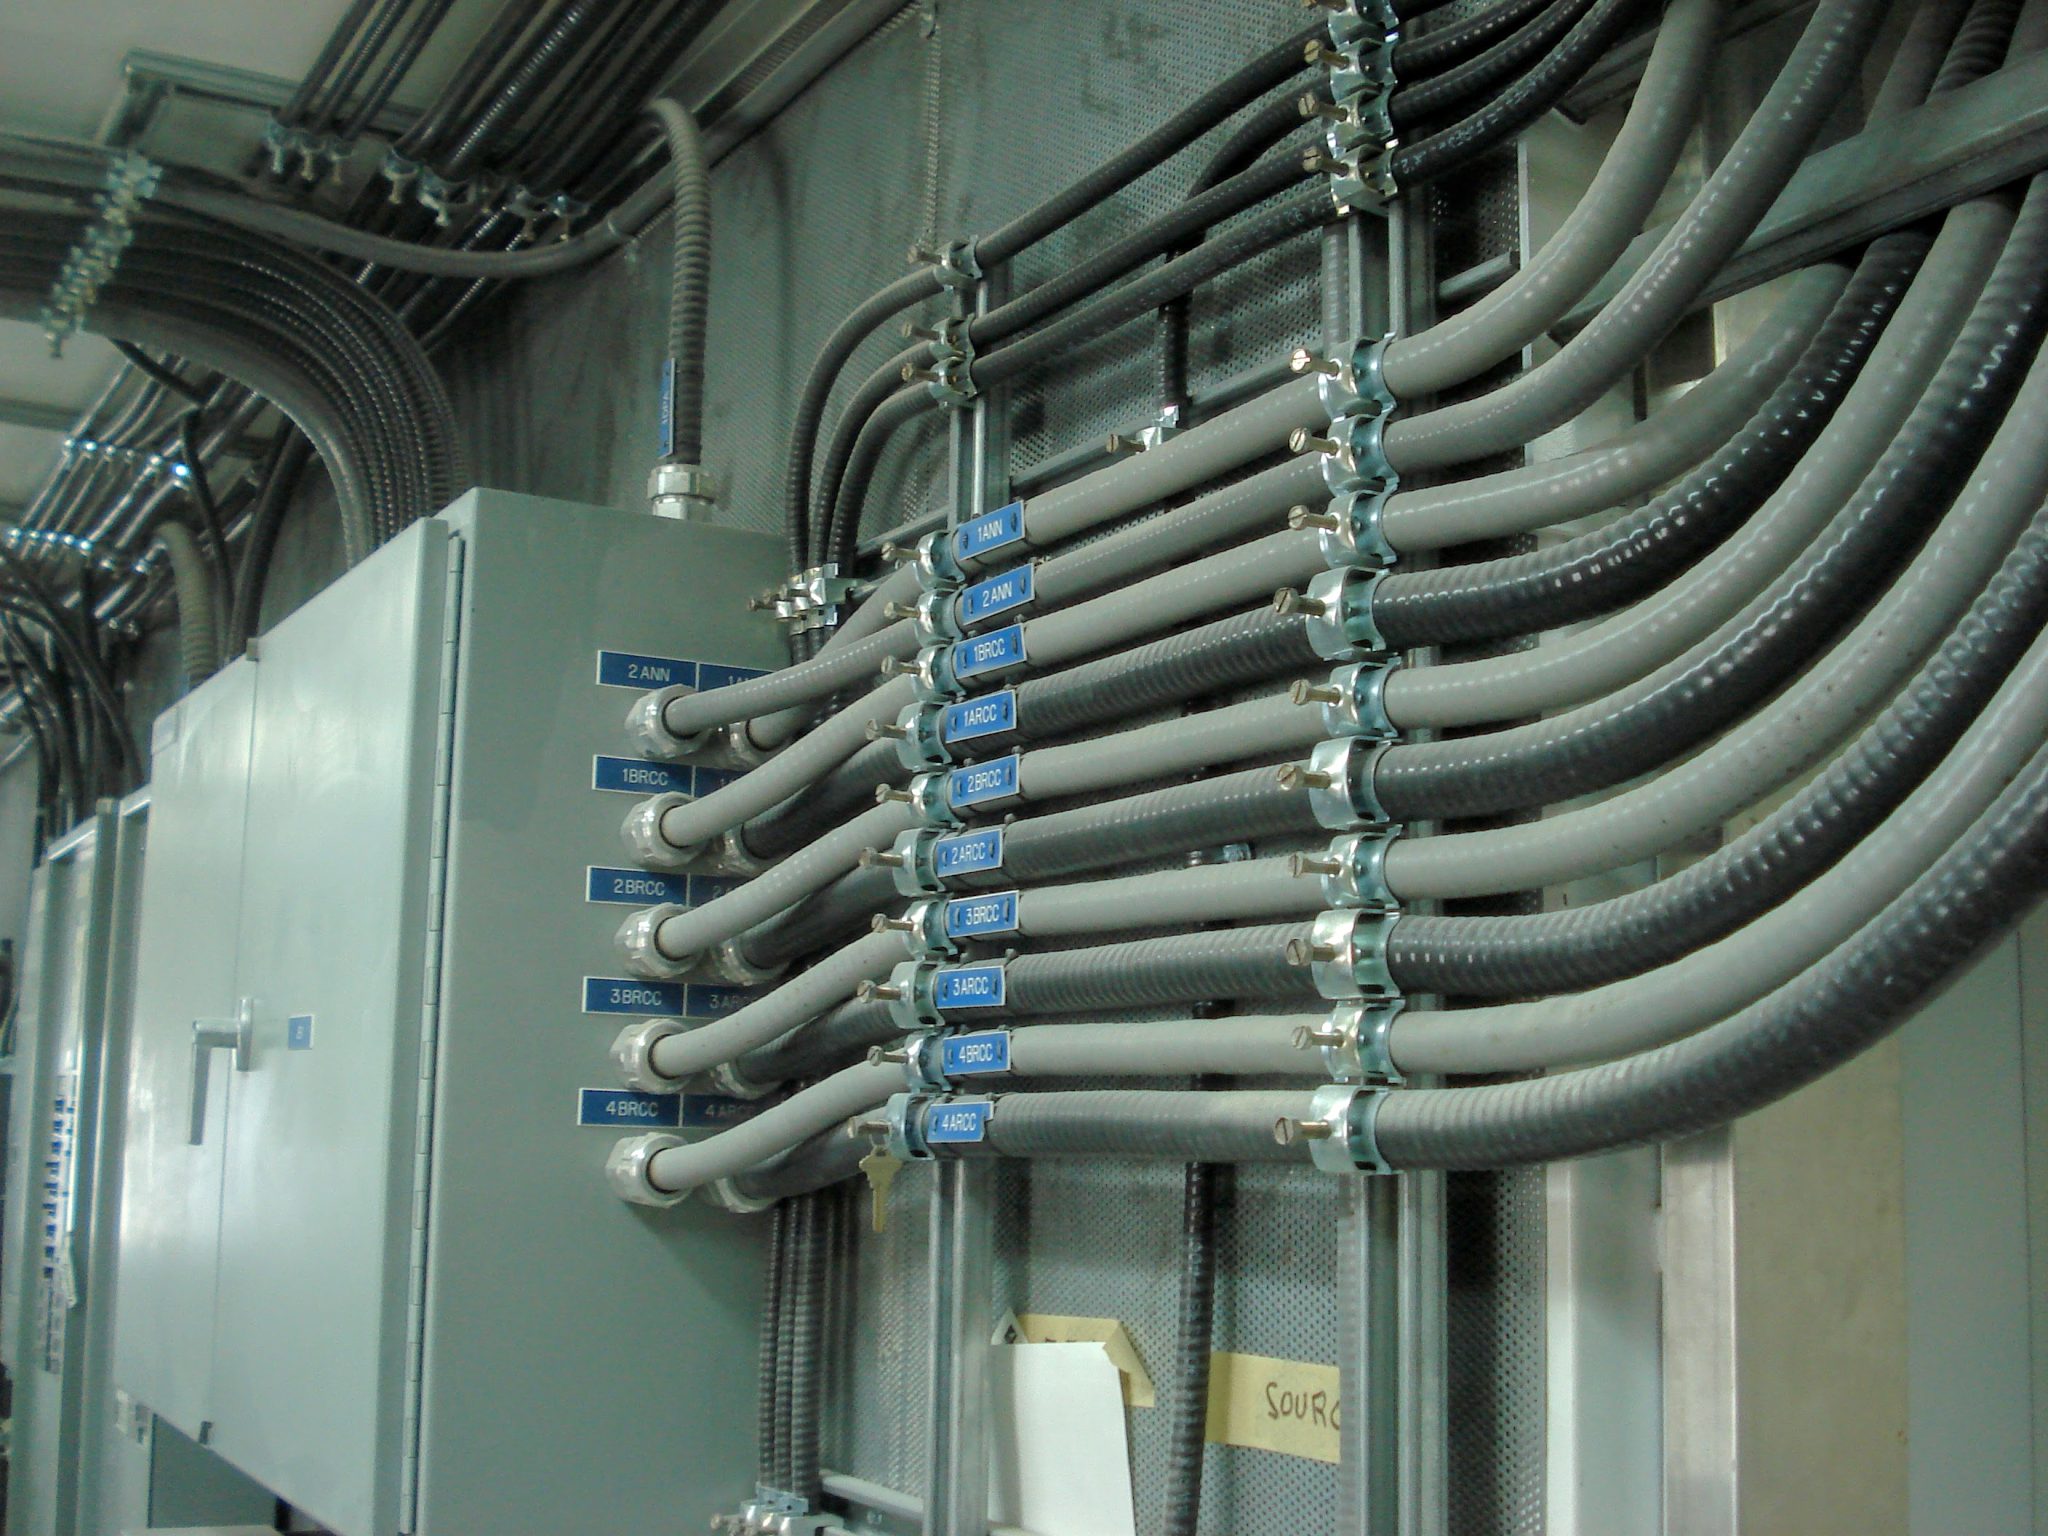 Teck cables entering a 18x36" junction box